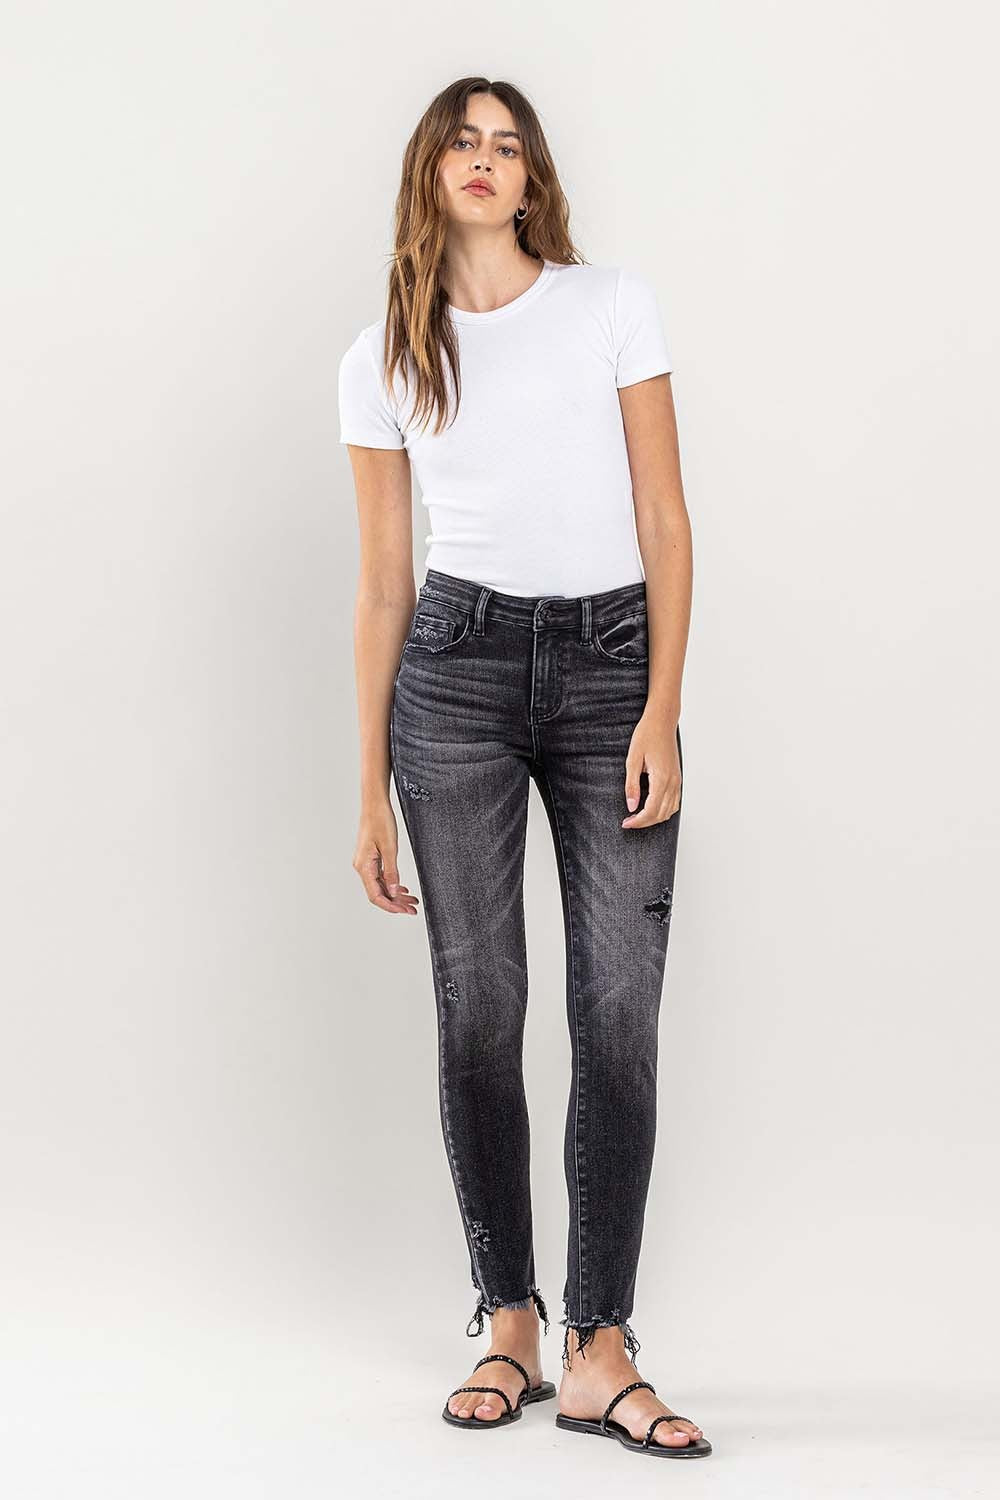 These raw hem cropped skinny jeans are a must-have for any fashion-forward individual. The raw hem adds a touch of edge to the classic skinny jeans silhouette. The cropped length is perfect for showcasing your favorite footwear. 